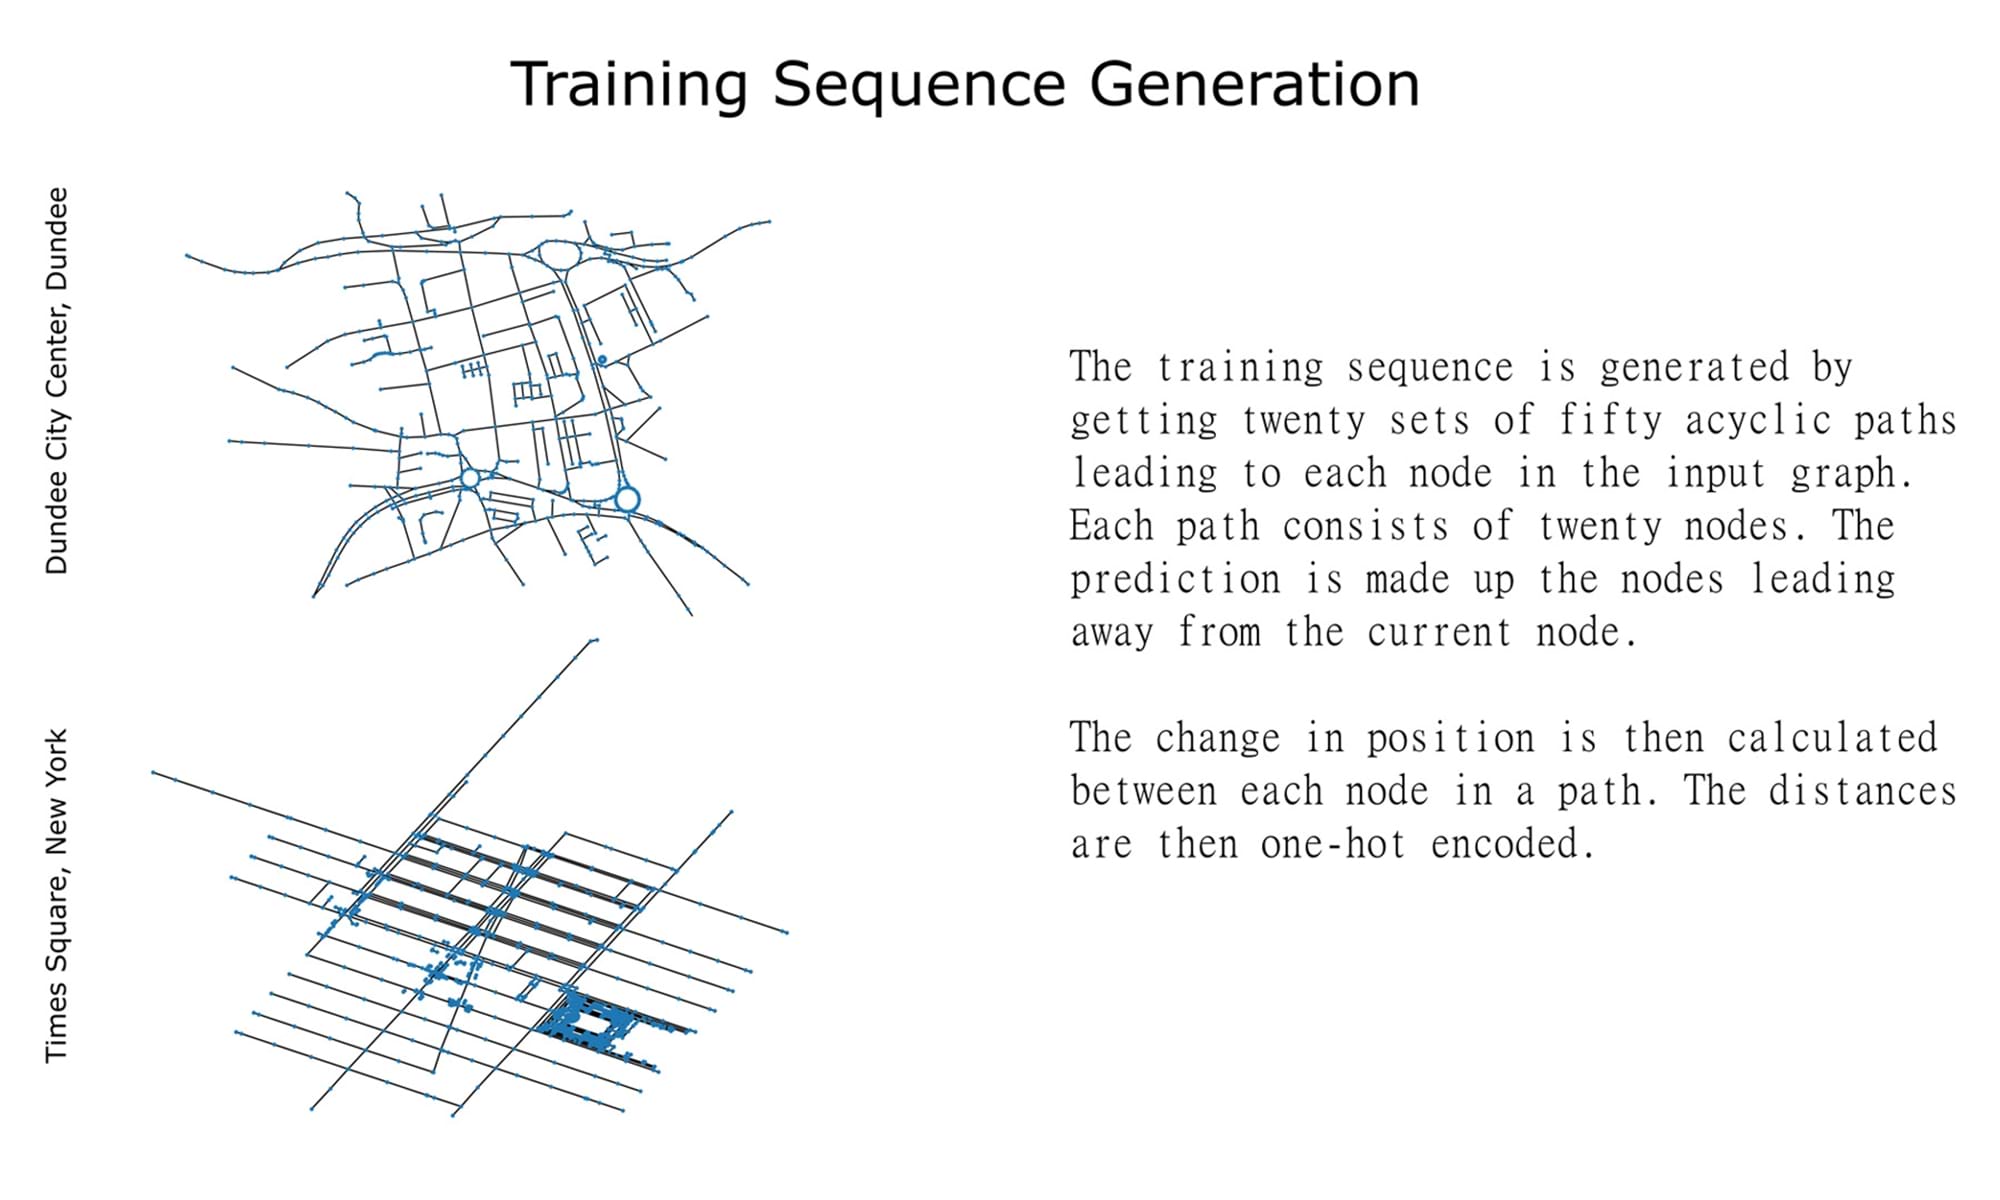 “Generating City Layouts Using Artificial Neural Networks” is a 2021 Digital Graduate Show project by Feliks Jakimow, a Computer Game Applications Development student at Abertay University.      